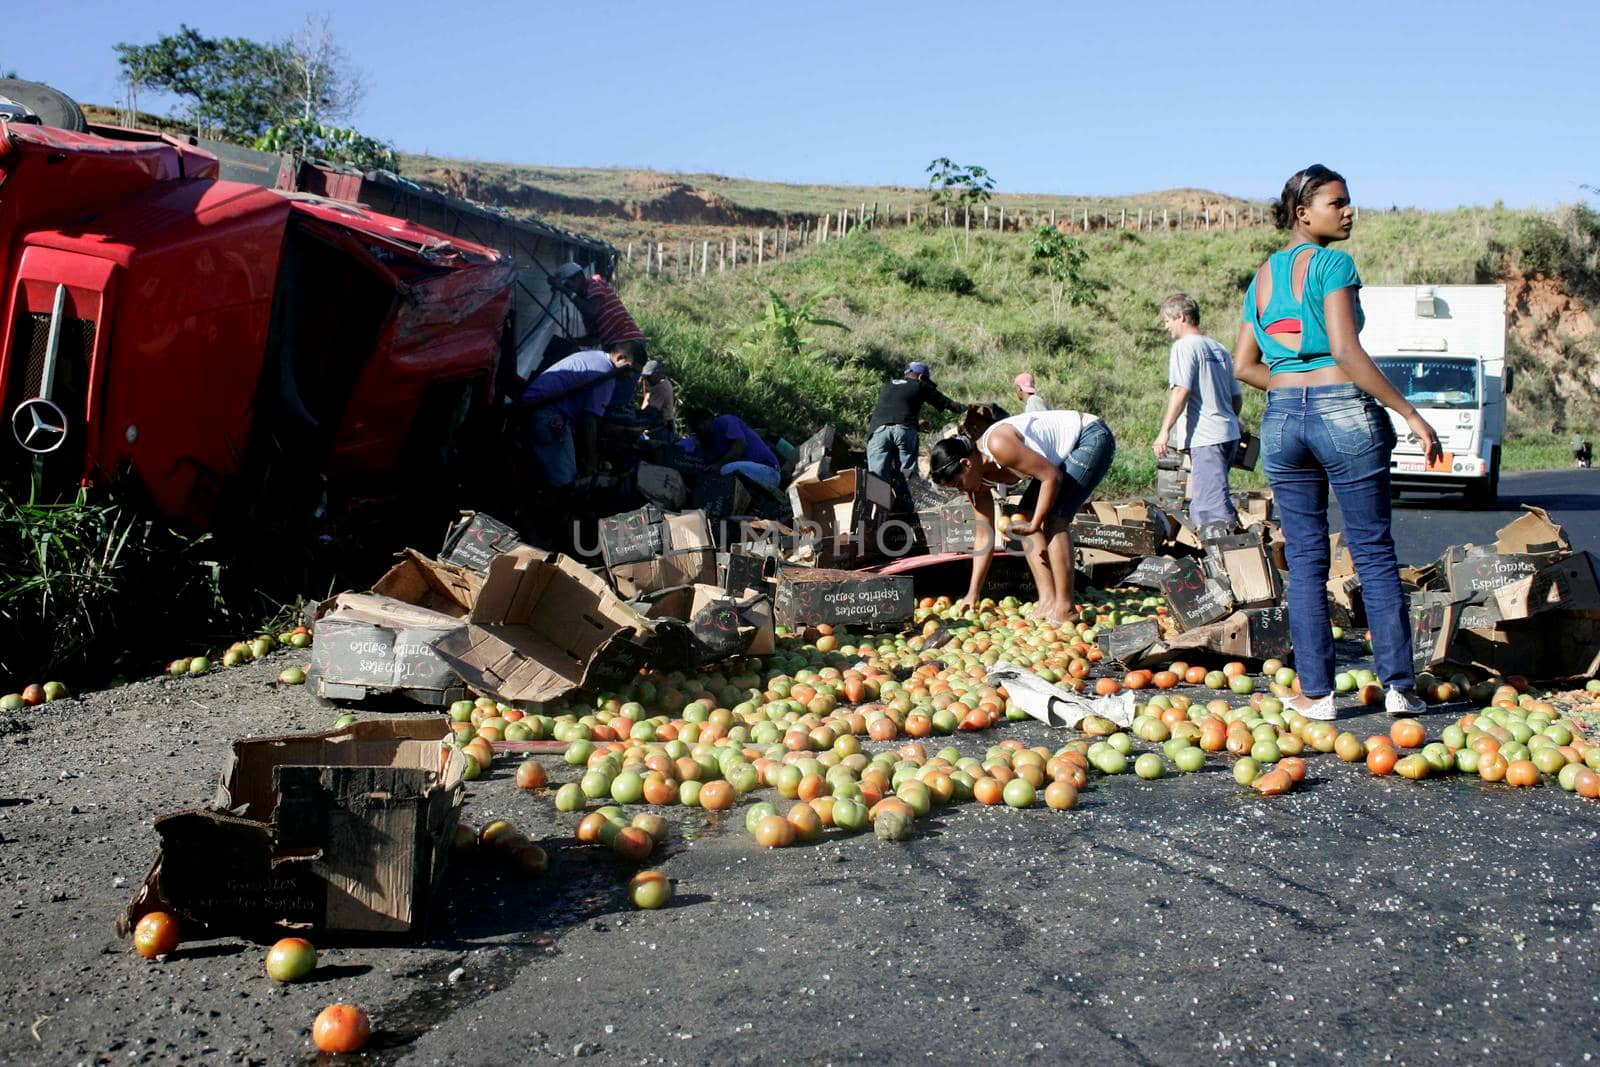 teixeira de freitas, bahia / brazil - july 28, 2009: Truck carrying tomatoes turns over and the cargo is looted by people on the BR 101 highway in Teixeira de Freitas.